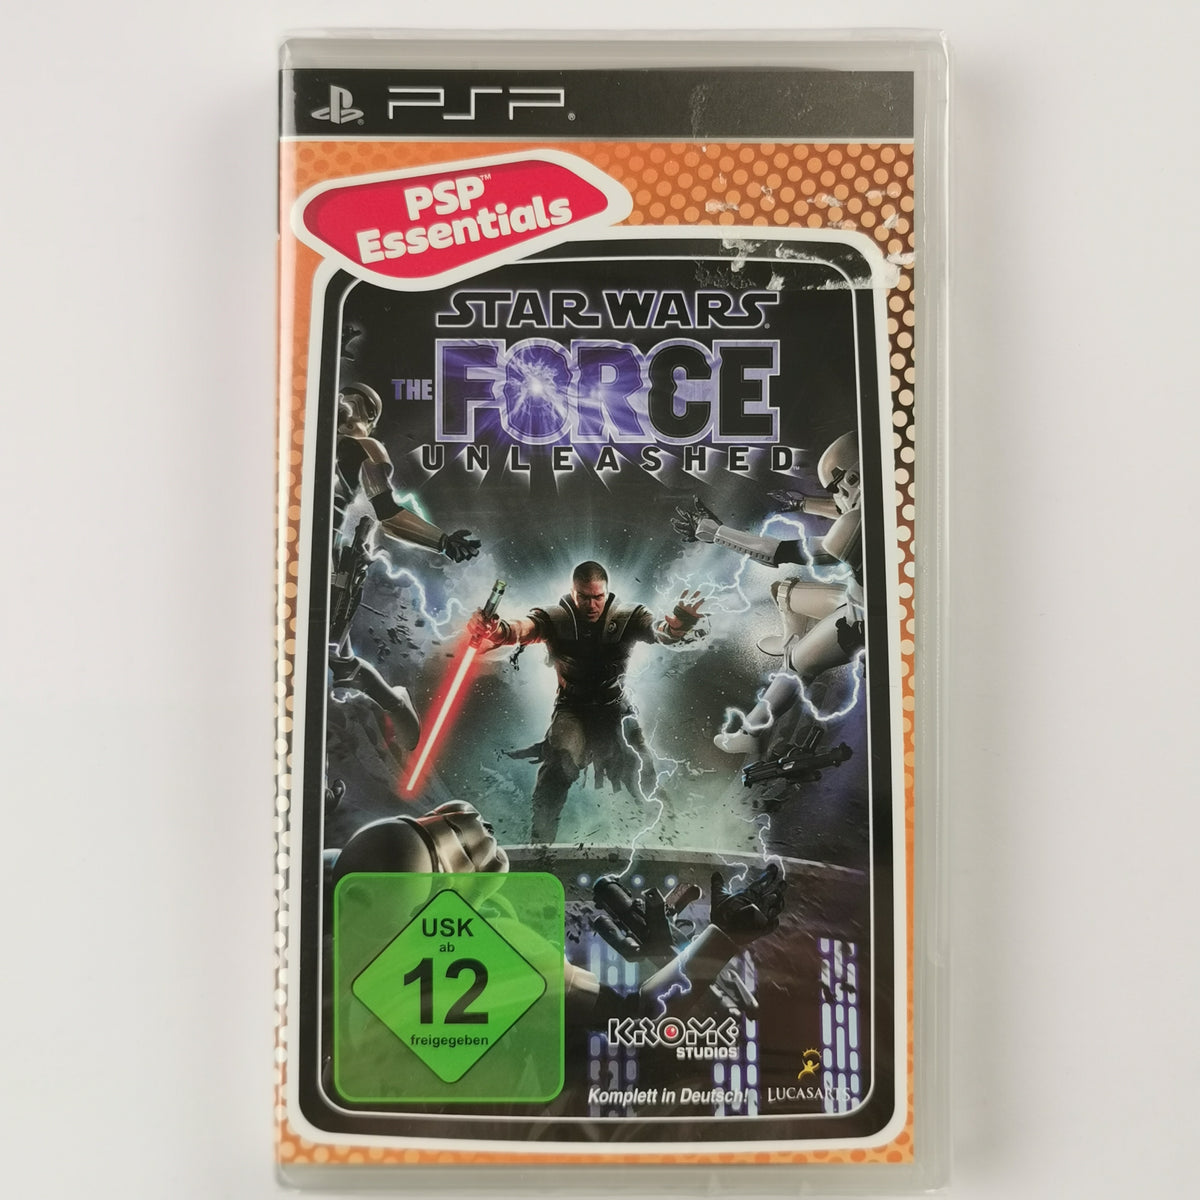 Star Wars: The Force Unleashed [PSP]